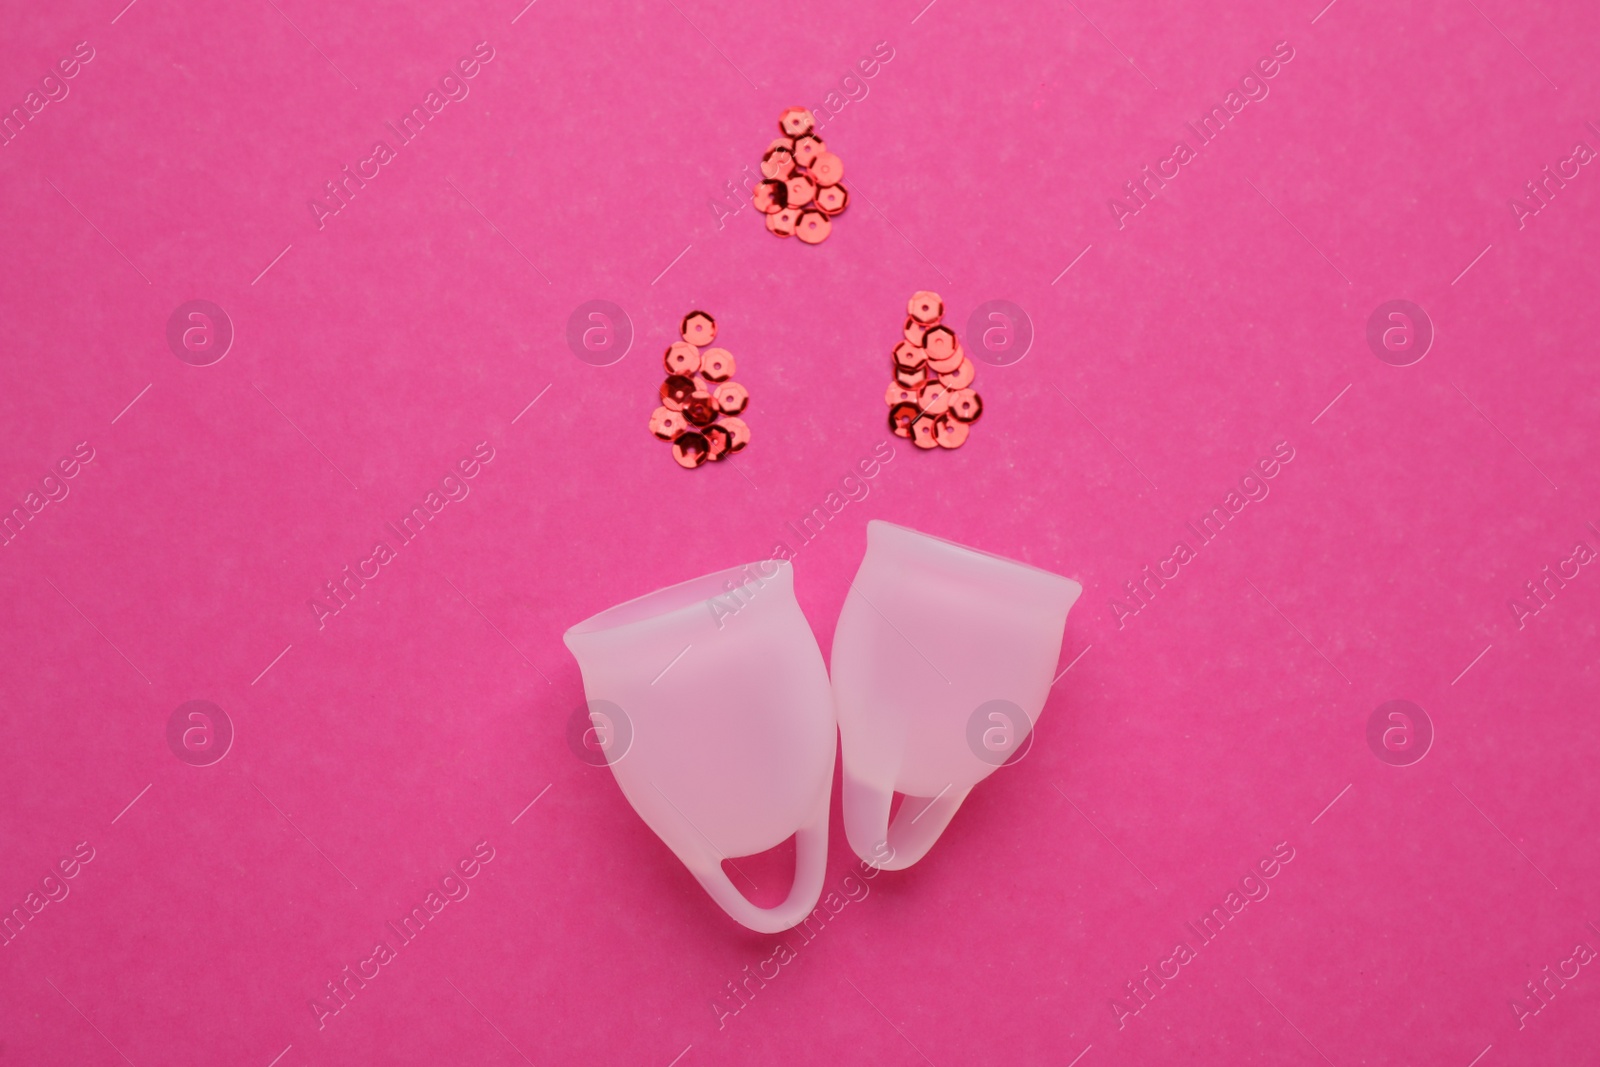 Photo of Menstrual cups near drops made of red sequins on pink background, flat lay